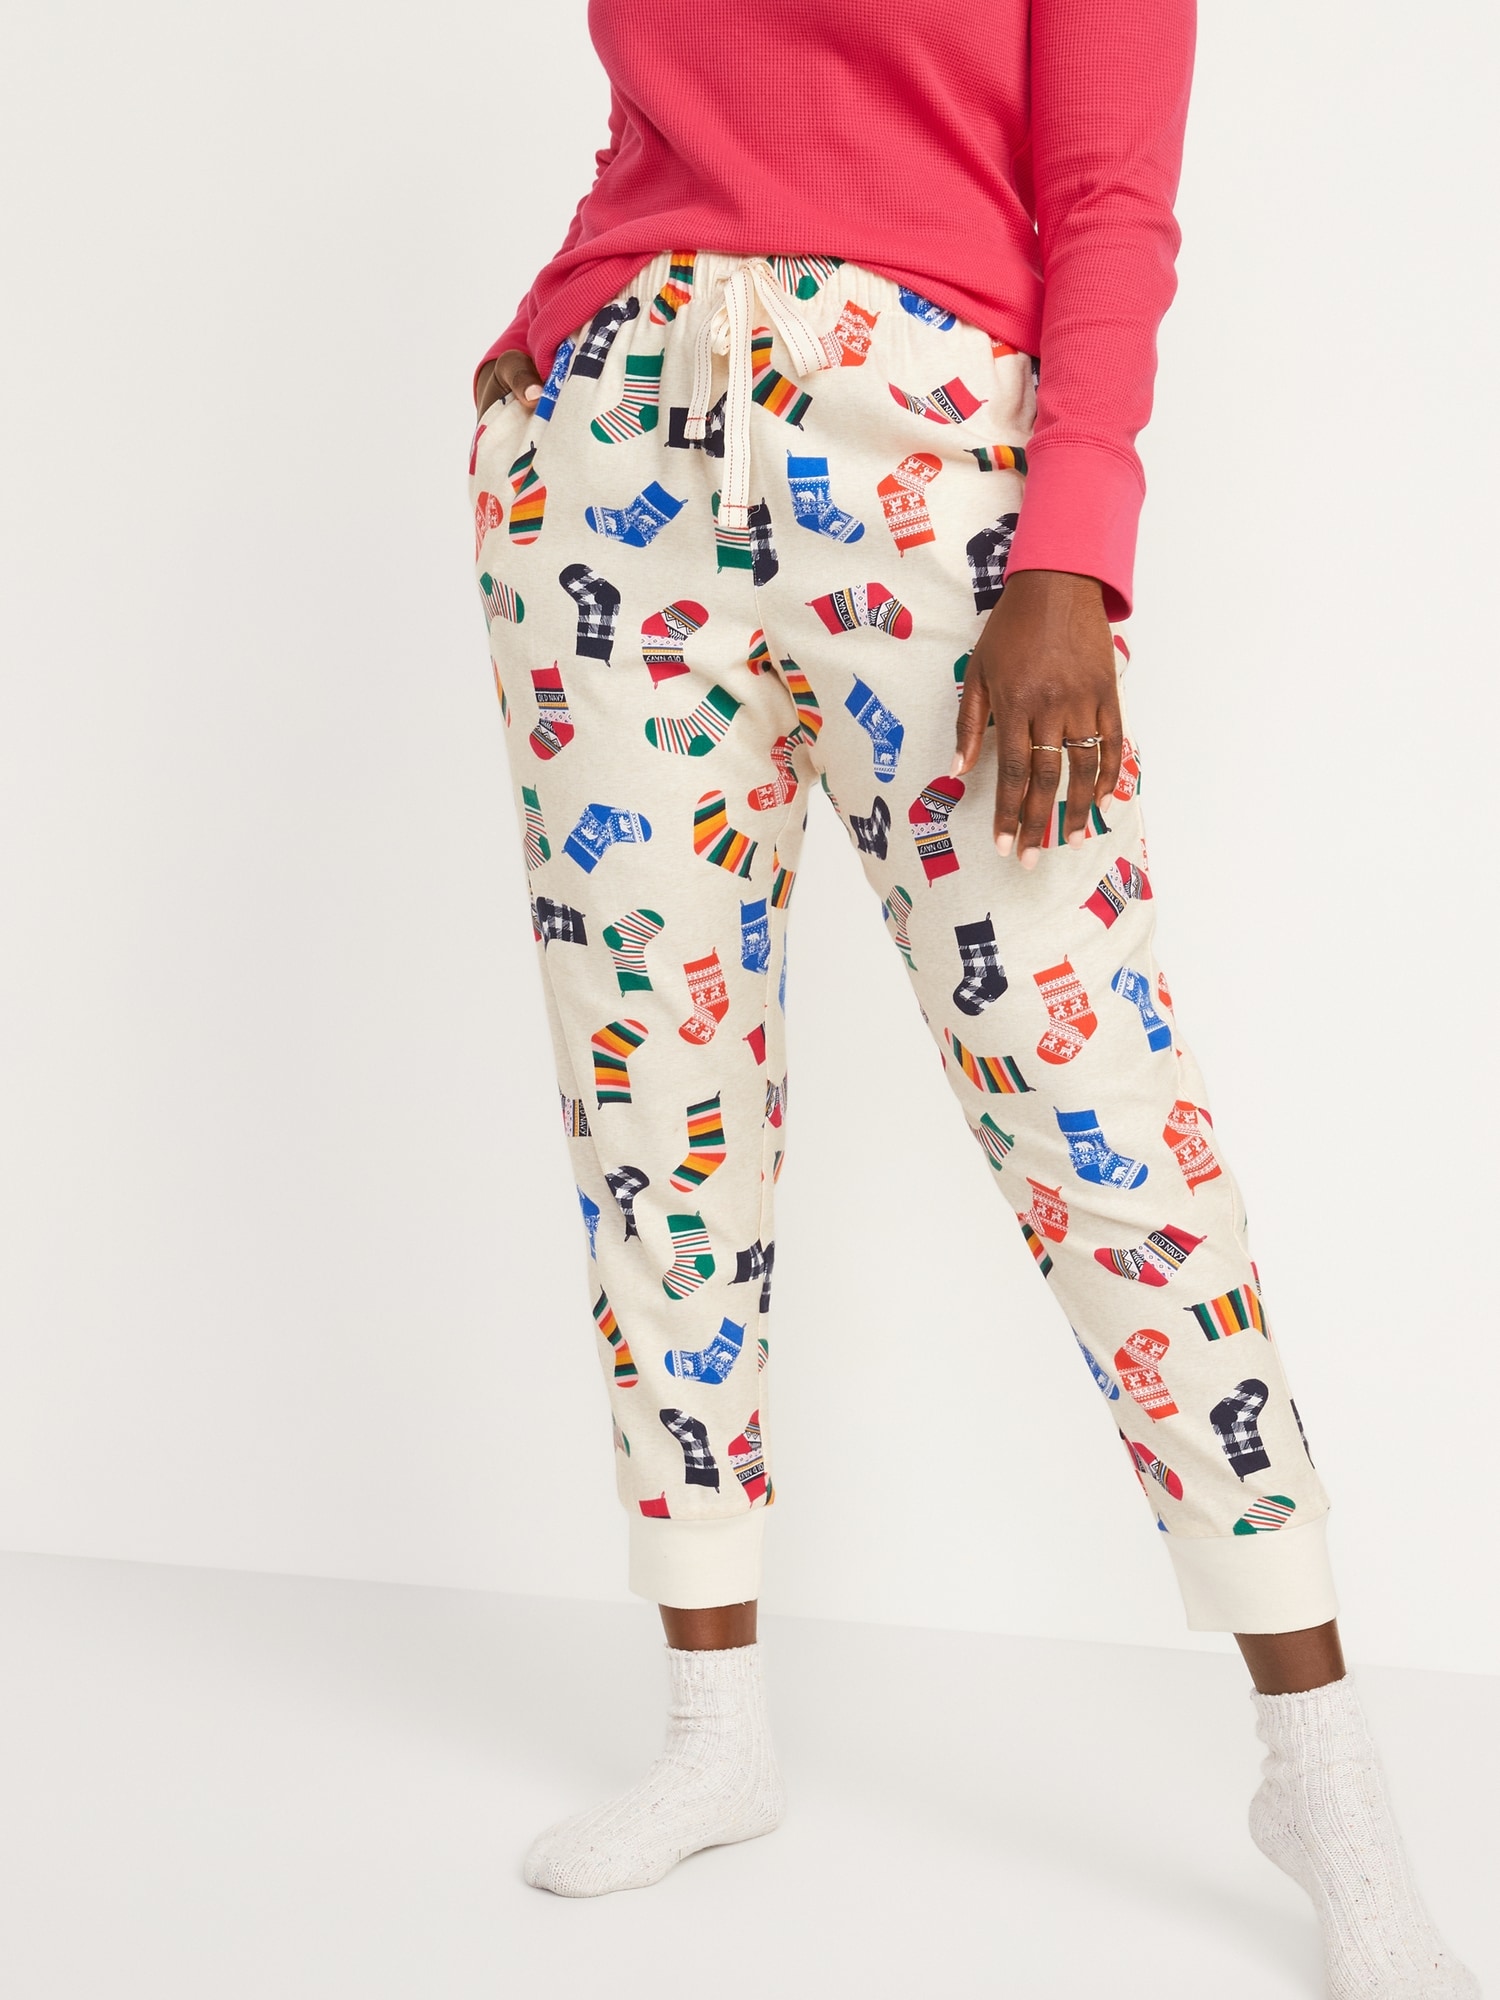 Printed Flannel Jogger Pajama Pants for Women